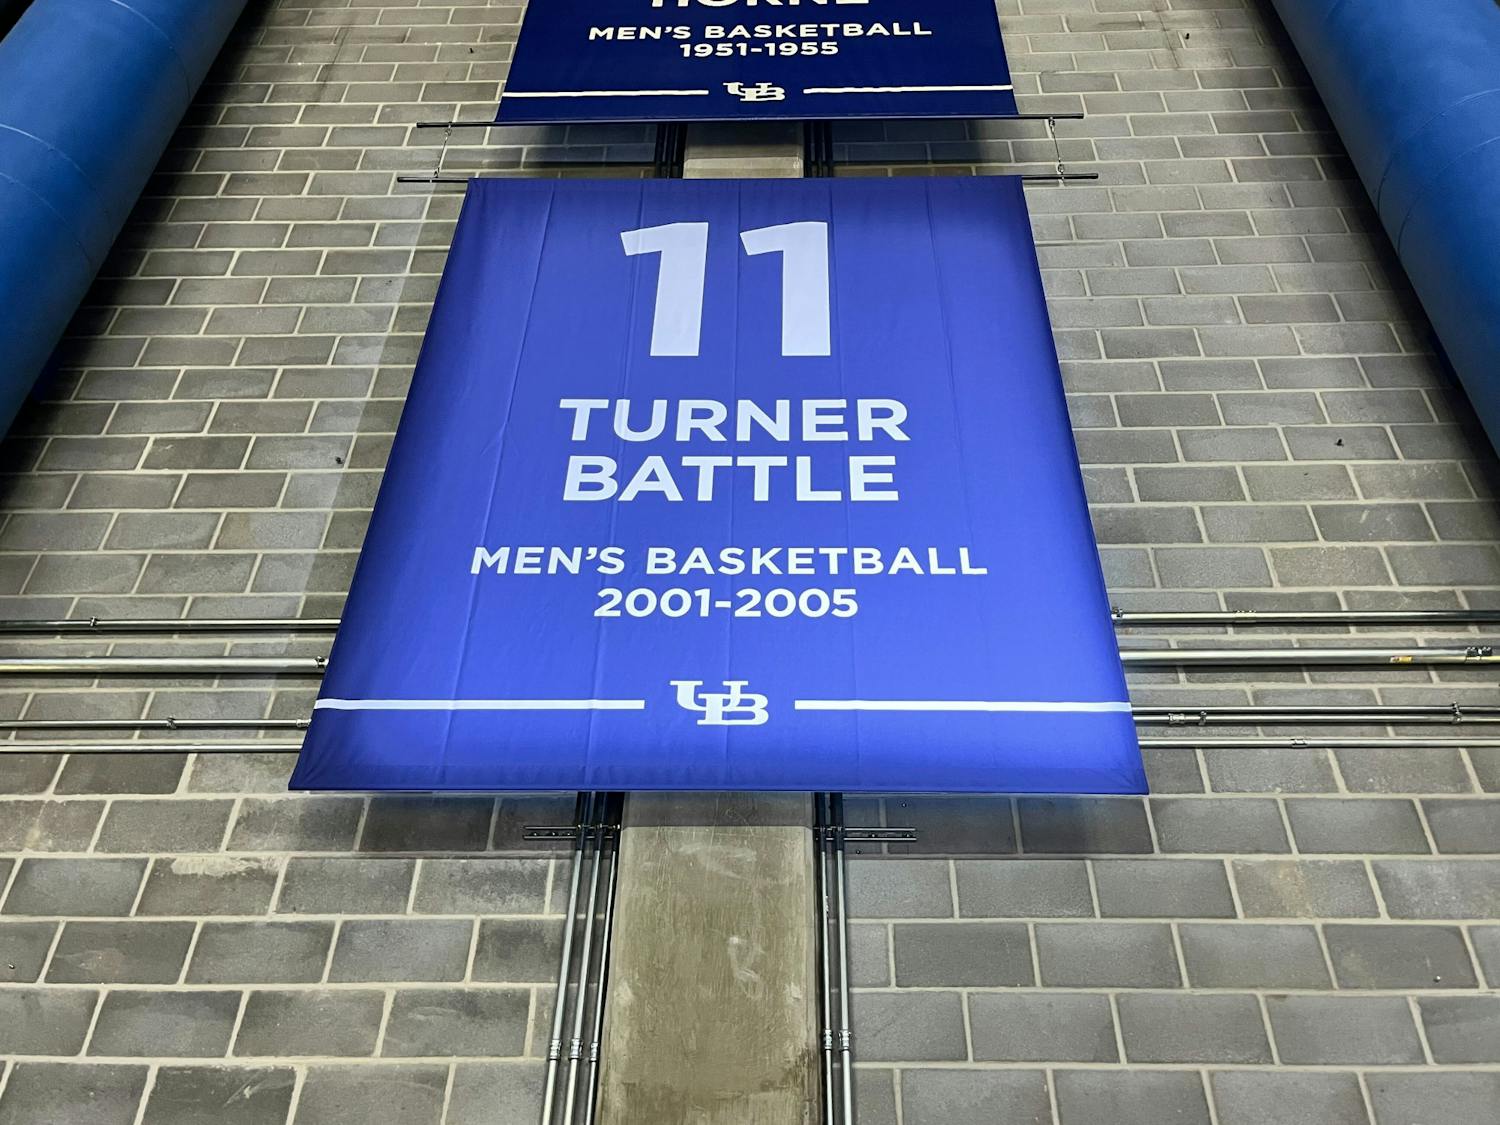 UB men’s basketball legend Turner Battle ‘05 was added to the Wall of Fame, making him the sixth men’s basketball player to be inducted.&nbsp;